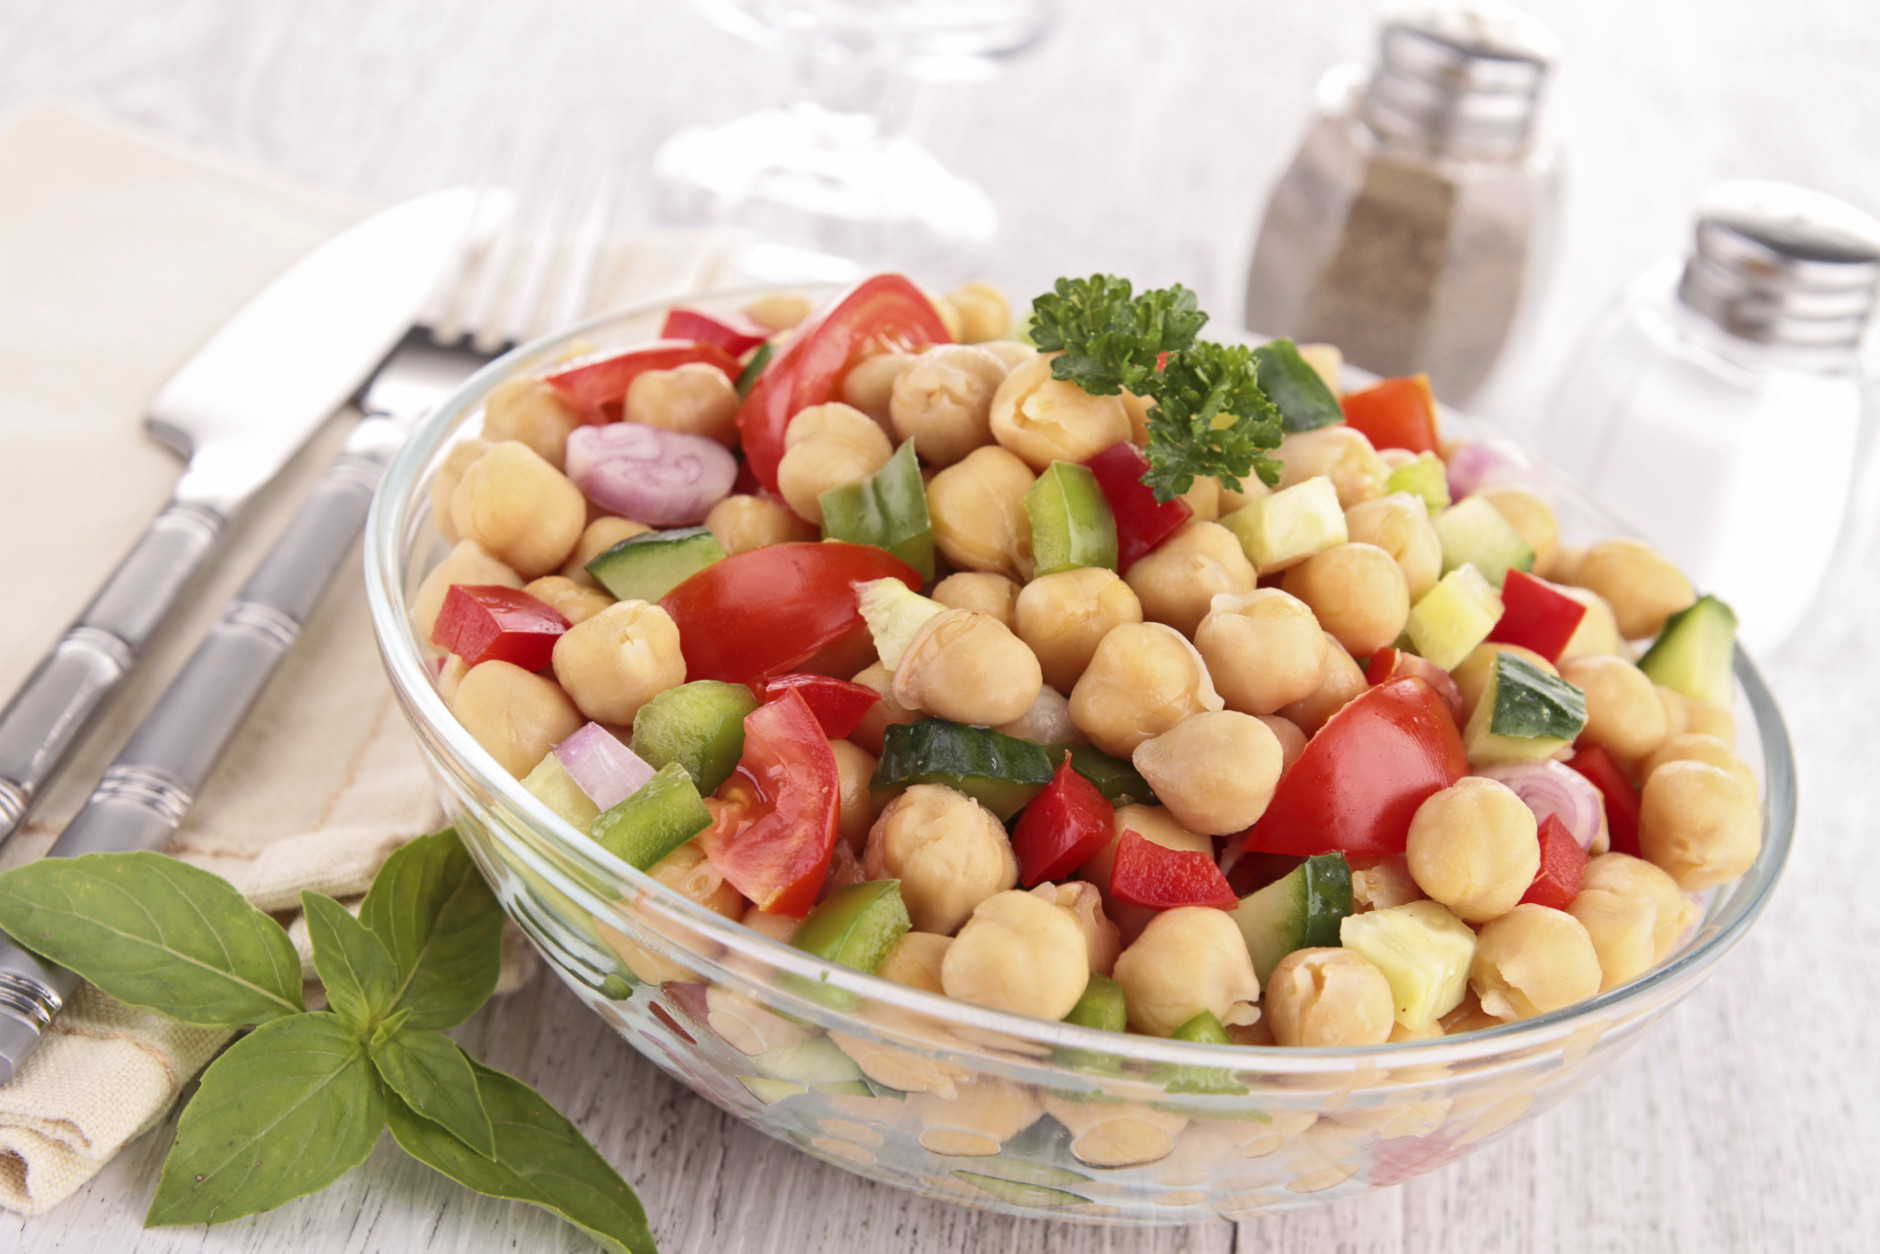 Chickpeas are showing up in a lot of different foods. (Getty Images/iStockphoto/margouillatphotos)